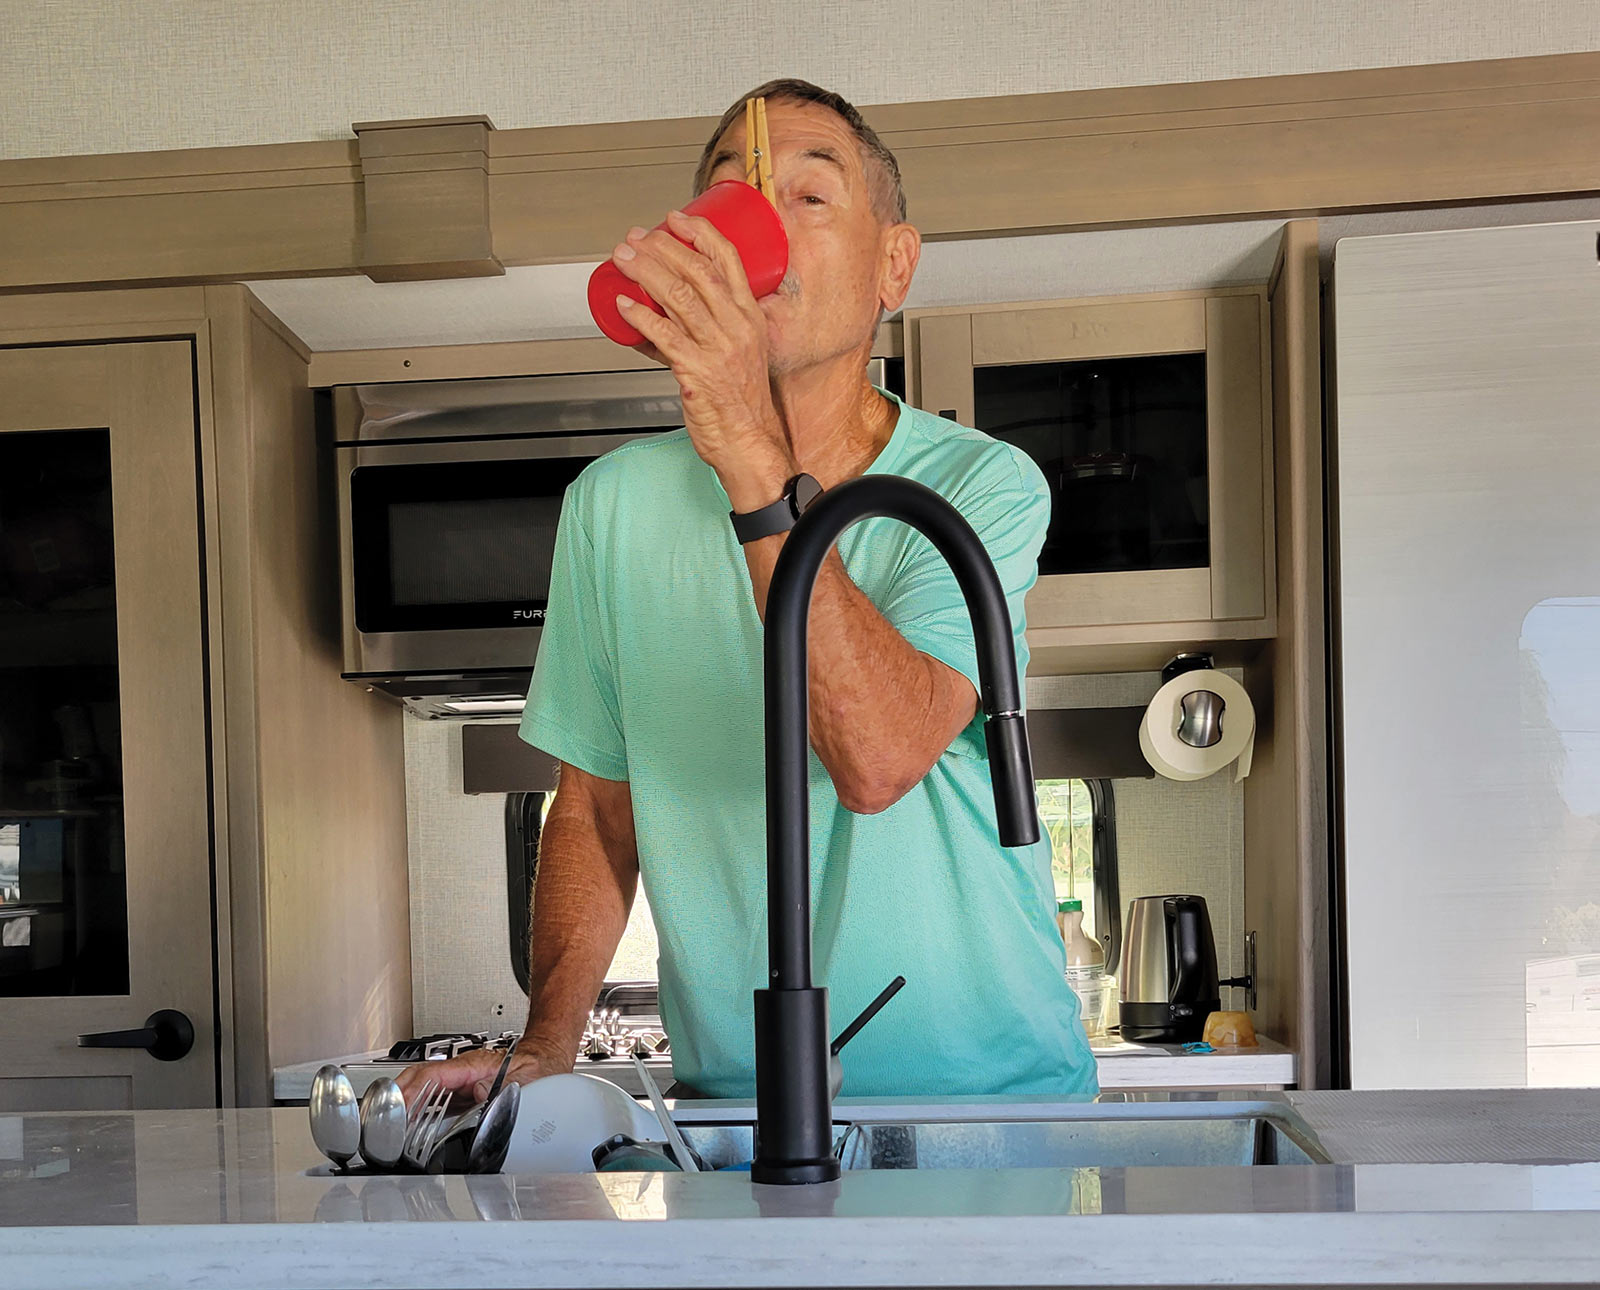 Man drinking cup of tap water with clothespin pinching his nose